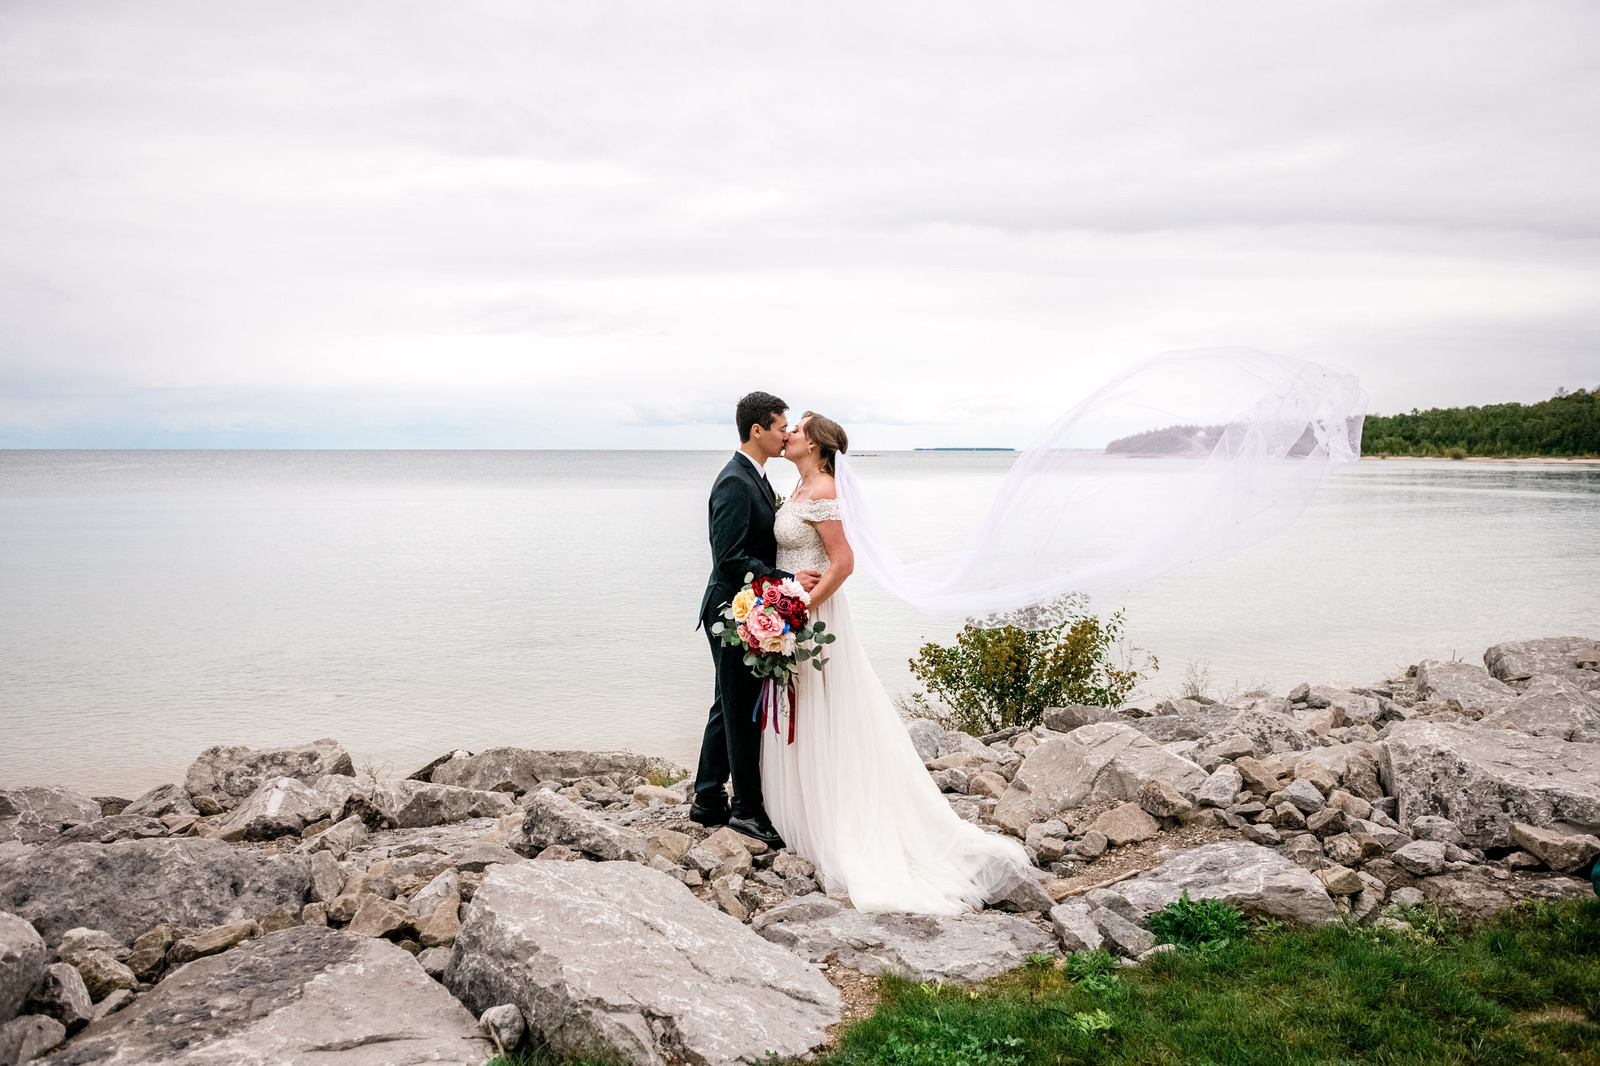 a couple in traditional wedding dress stand on rocks kissing by the lake with the veil flowing.